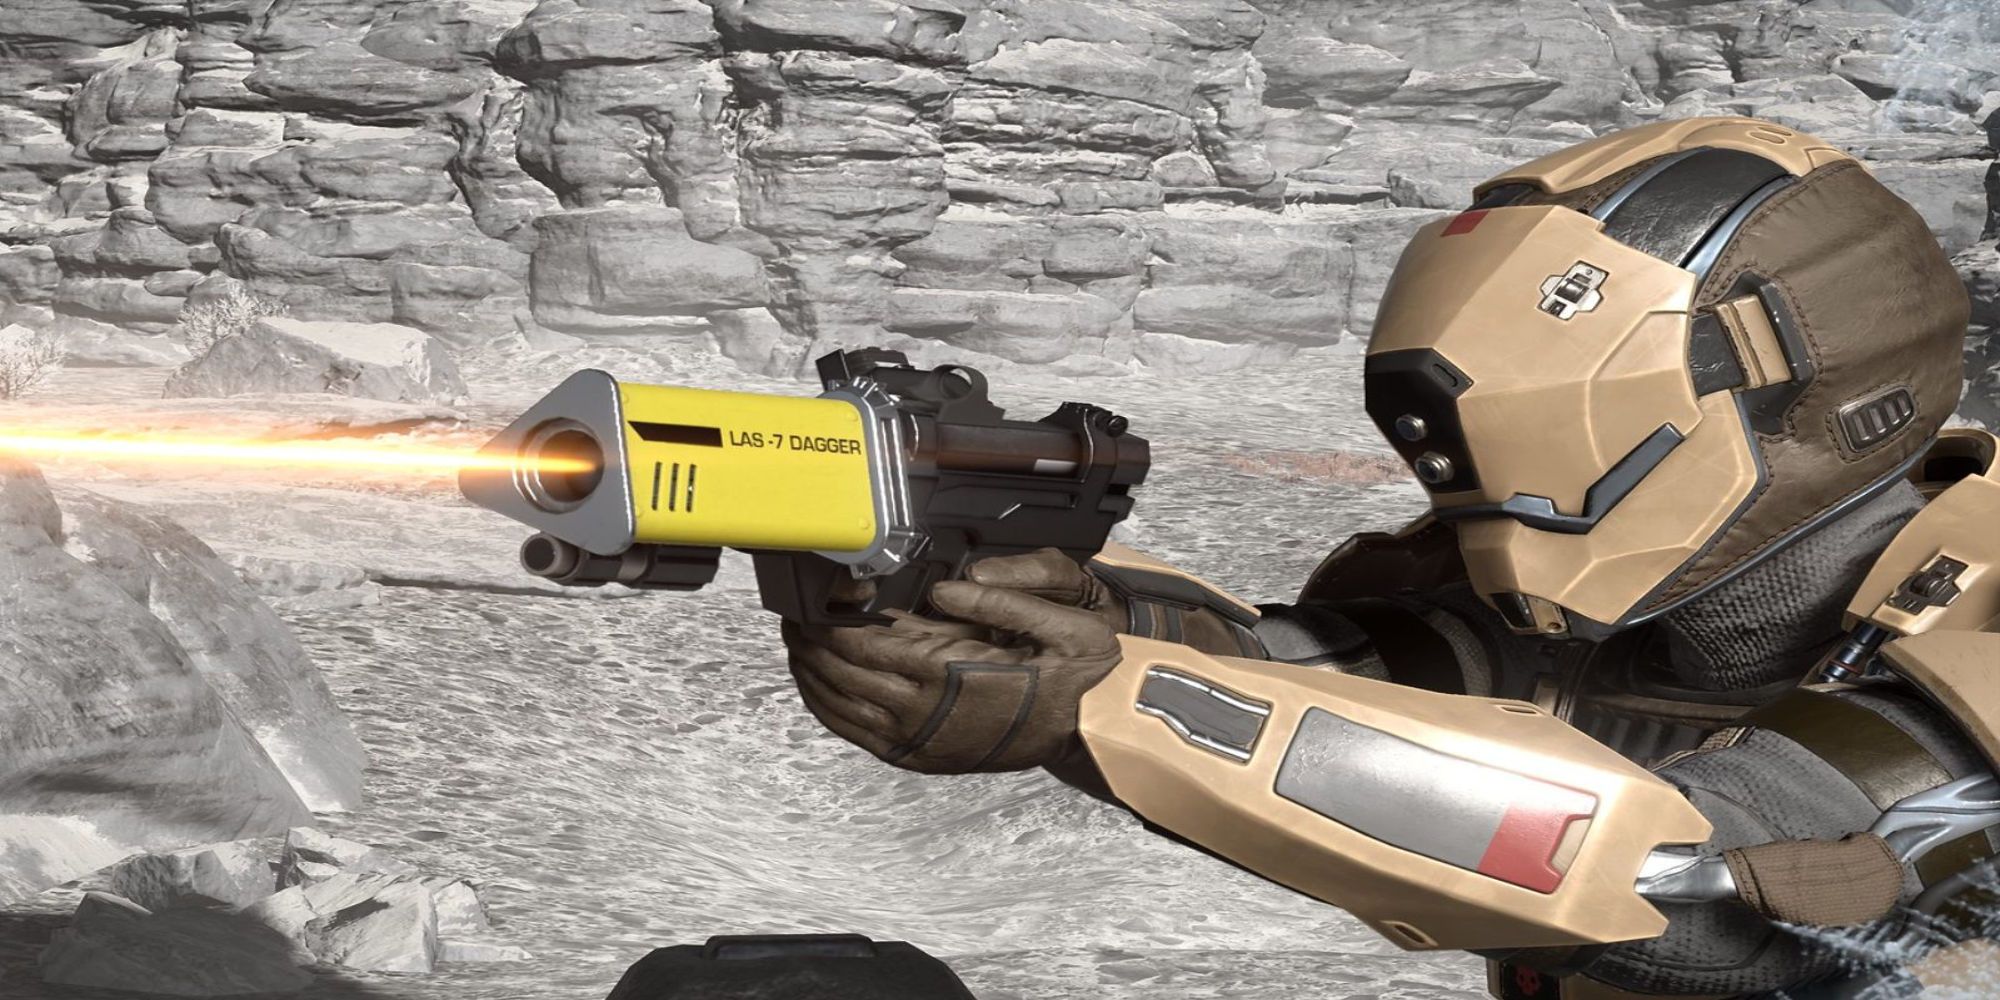 A Helldiver holds the LAS-7 Dagger pistol from a promo for the Cutting Edge Warbond